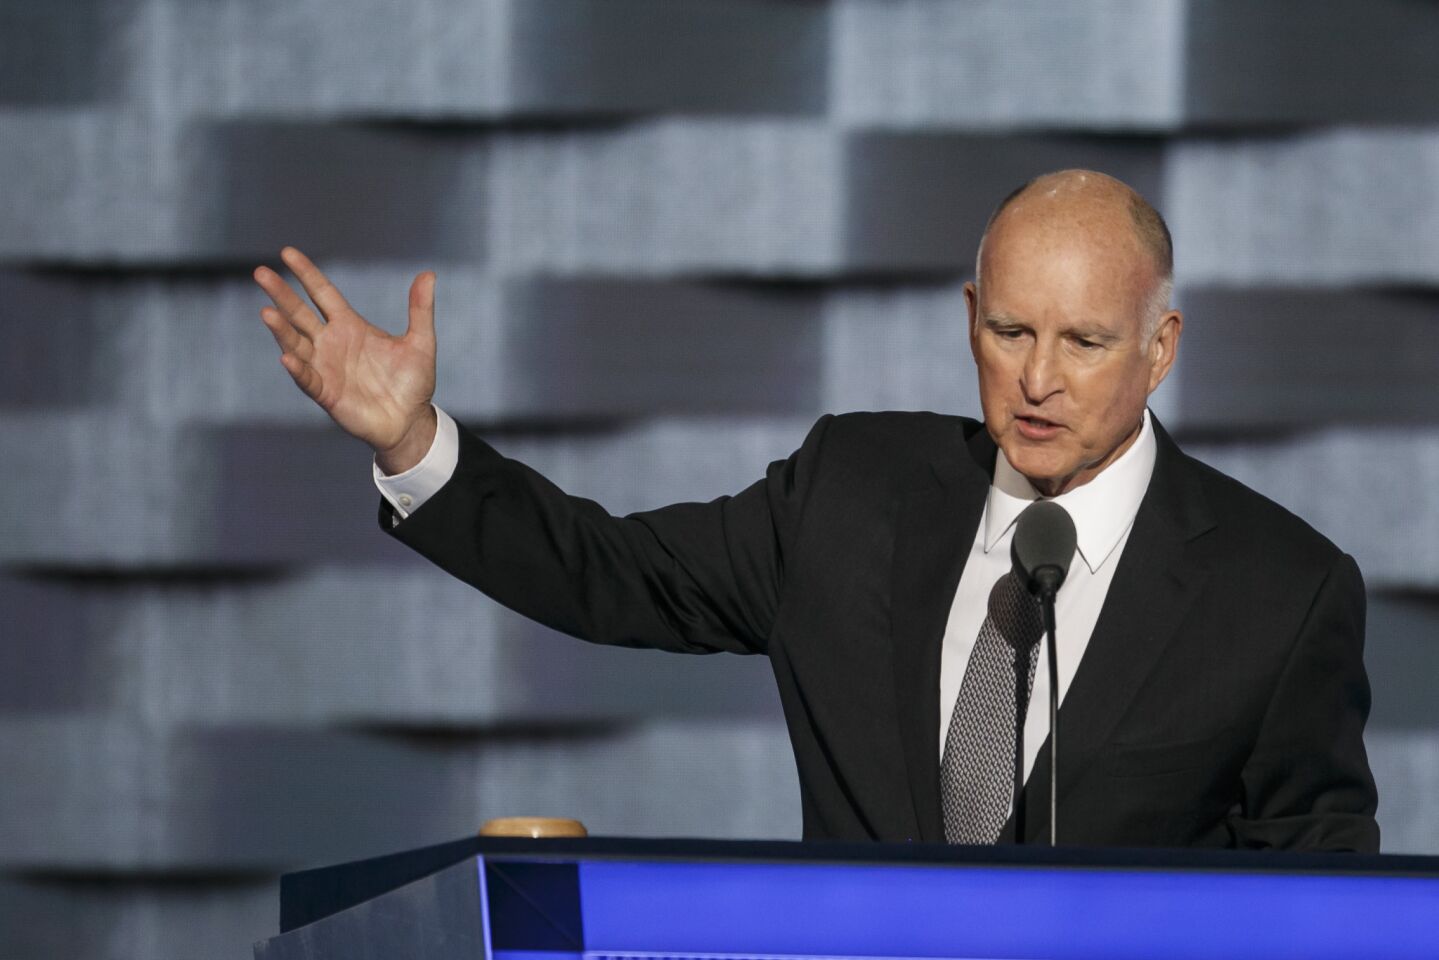 California Governor Jerry Brown at the 2016 Democratic National Convention in Philadelphia.